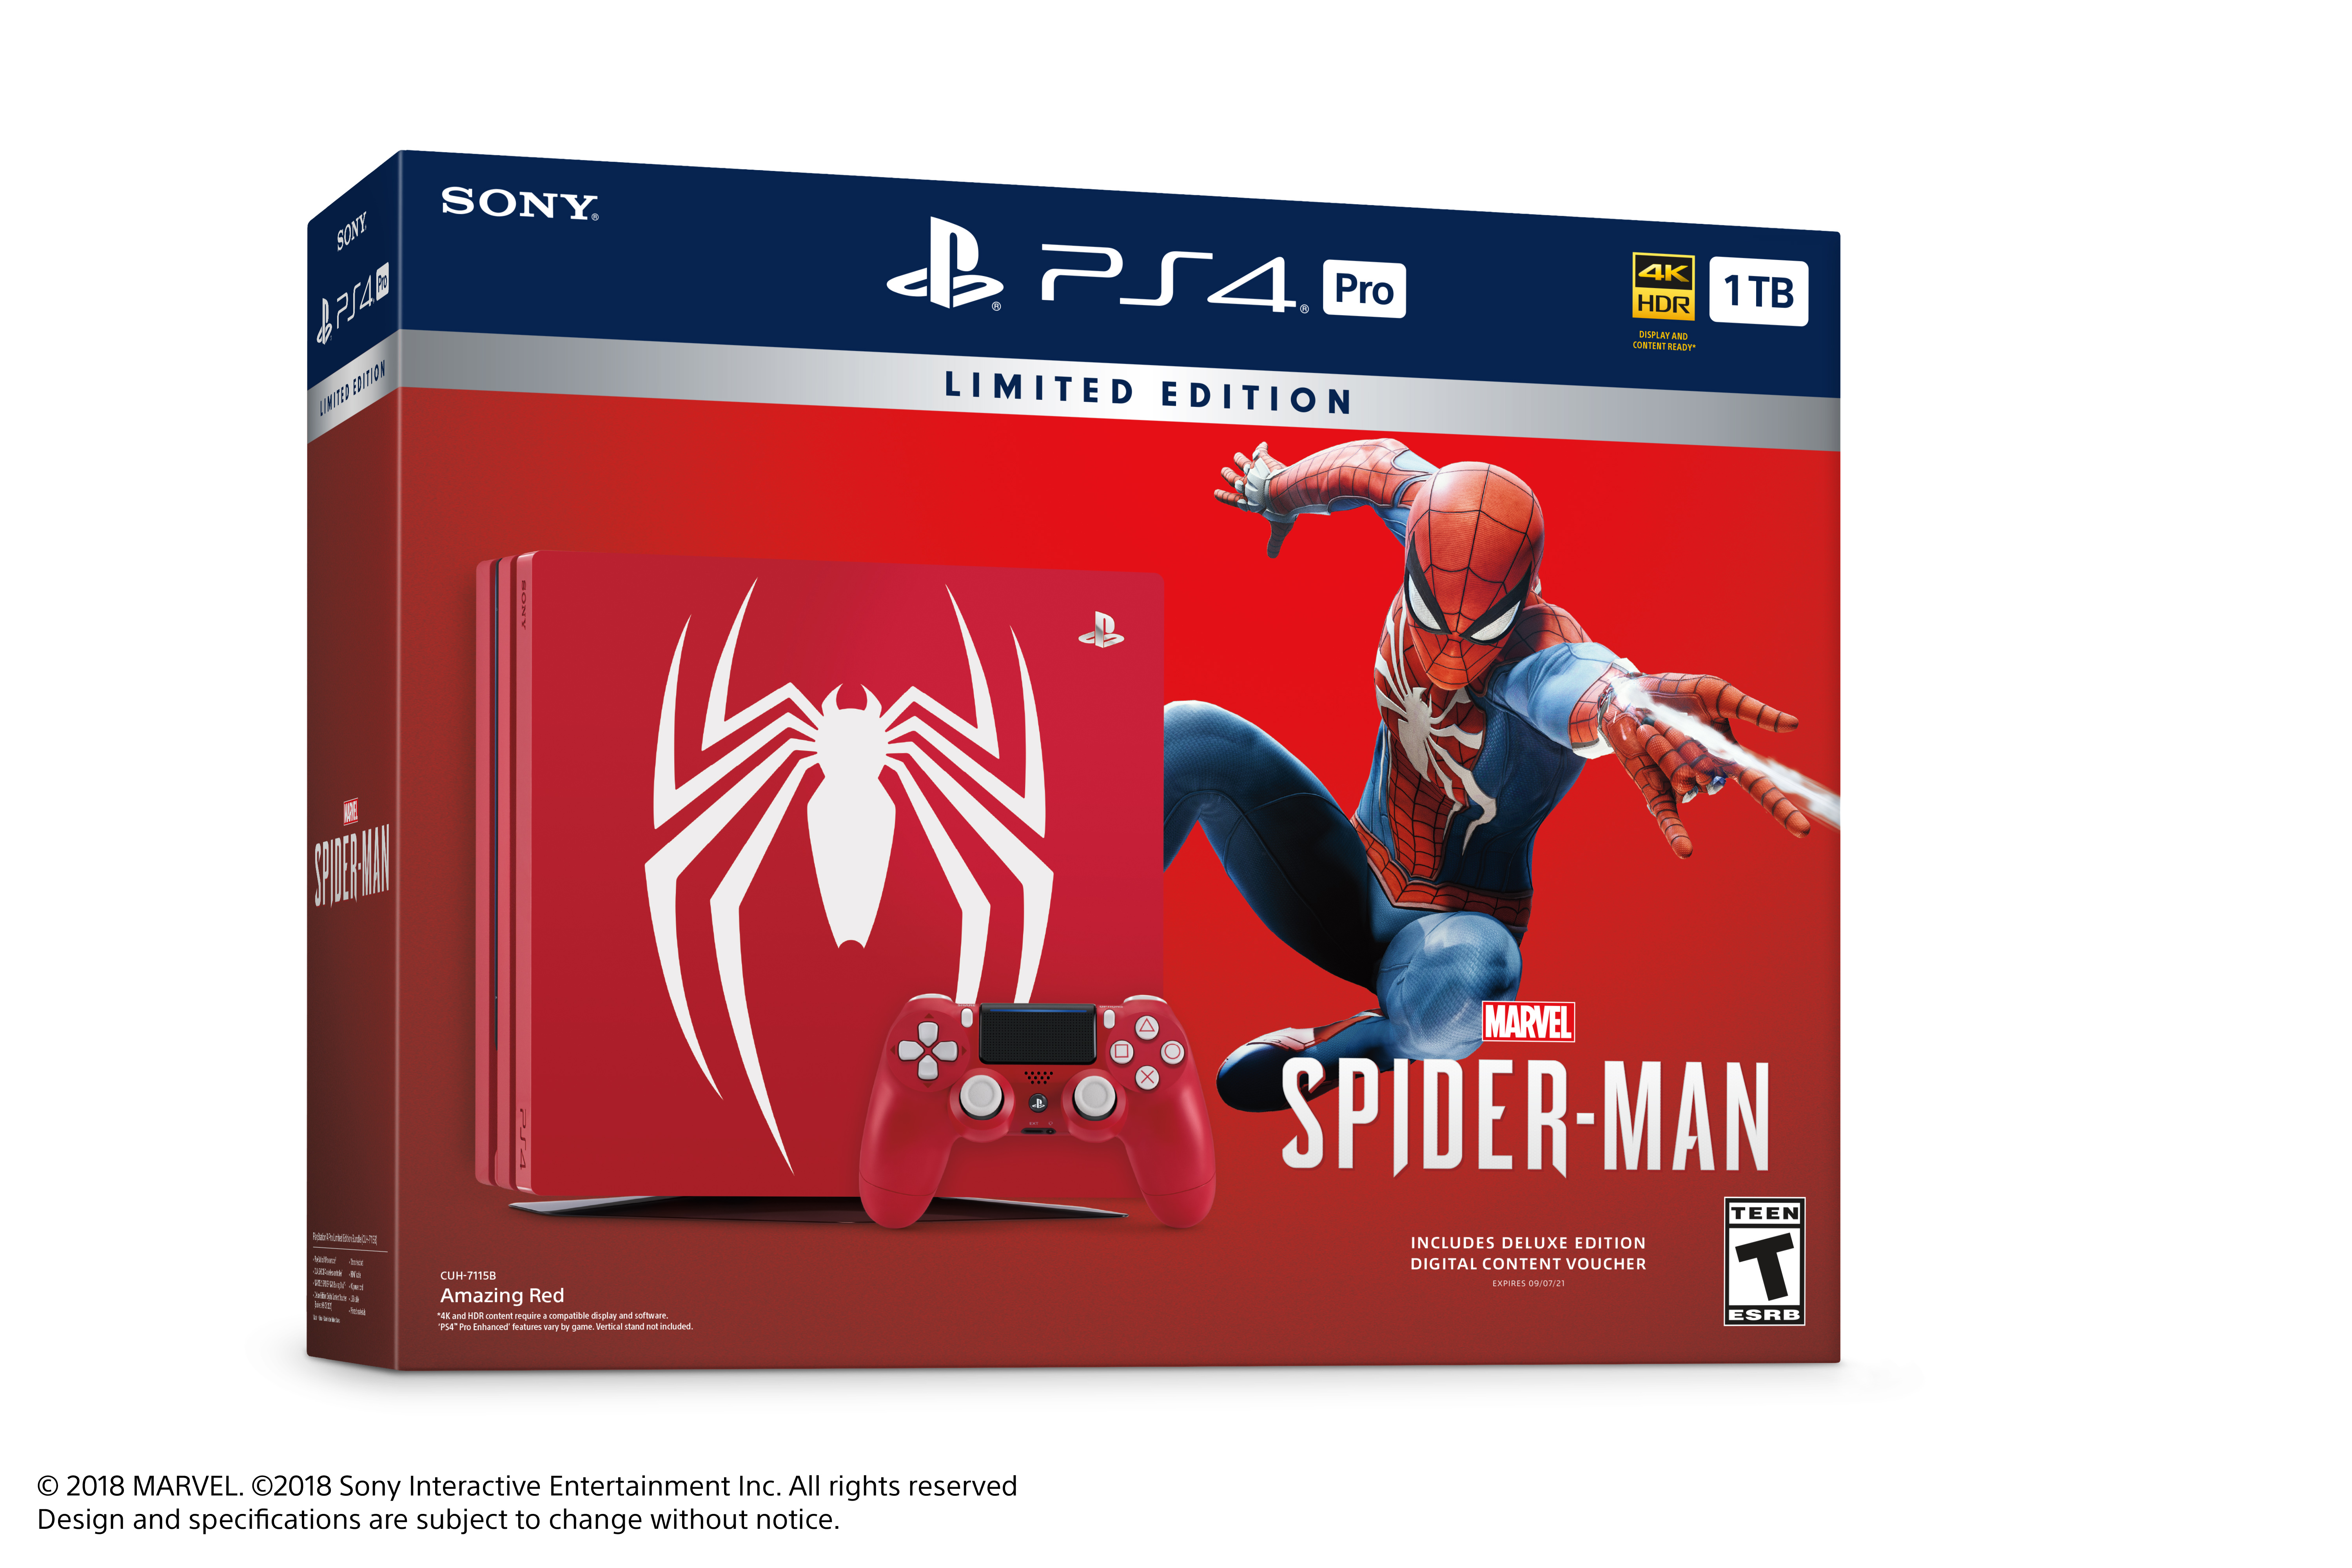 Sony Limited Edition Marvels Spider-Man PS4 Pro 1TB Bundle, Red - image 2 of 8